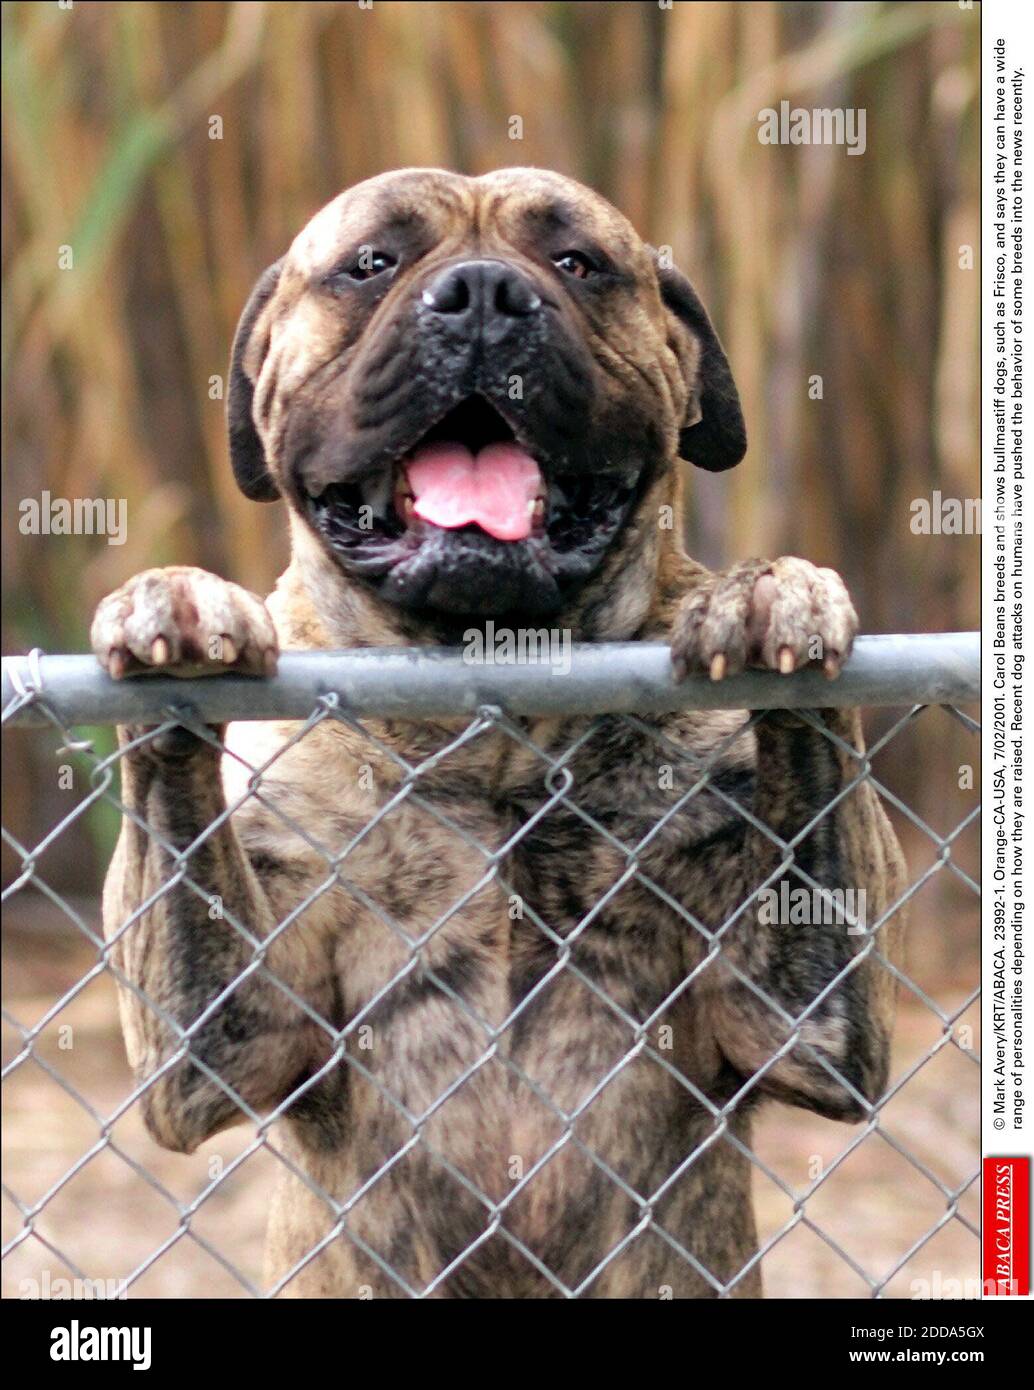 NO FILM, NO VIDEO, NO TV, NO DOCUMENTARY - © Mark Avery/KRT/ABACA. 23992-1. Orange-CA-USA, 7/02/2001. Carol Beans breeds and shows bullmastiff dogs, such as Frisco, and says they can have a wide range of personalities depending on how they are raised. Recent dog attacks on humans have pushed the b Stock Photo